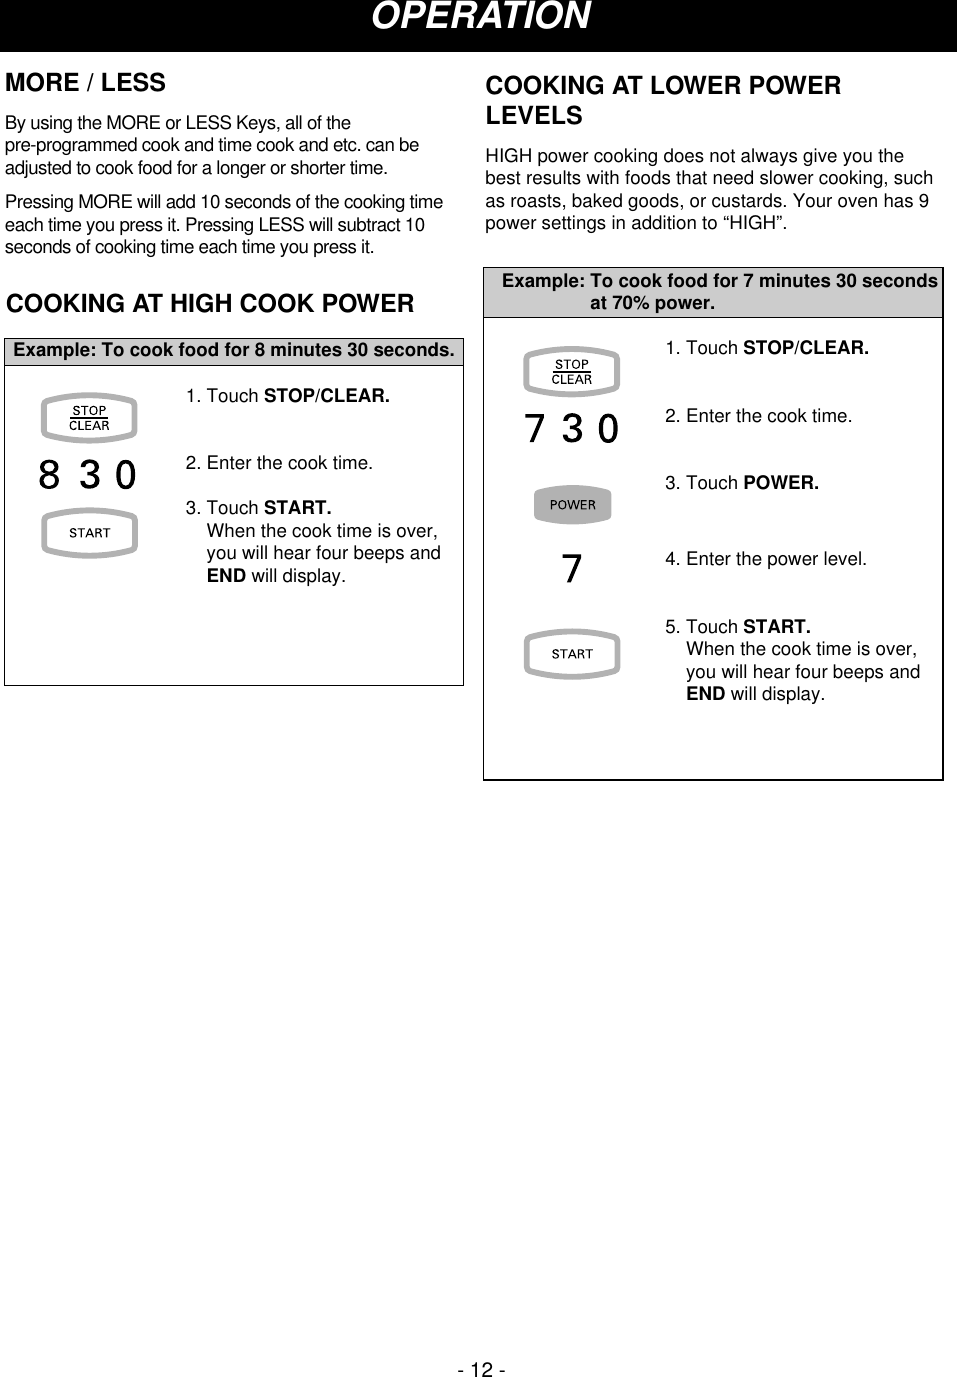 COOKING AT HIGH COOK POWER1. Touch STOP/CLEAR.2. Enter the cook time.3. Touch START.When the cook time is over,you will hear four beeps andEND will display.Example: To cook food for 8 minutes 30 seconds. 1. Touch STOP/CLEAR.2. Enter the cook time.3. Touch POWER.4. Enter the power level.5. Touch START.When the cook time is over,you will hear four beeps andEND will display.Example: To cook food for 7 minutes 30 secondsat 70% power.COOKING AT LOWER POWERLEVELSHIGH power cooking does not always give you thebest results with foods that need slower cooking, suchas roasts, baked goods, or custards. Your oven has 9power settings in addition to “HIGH”. OPERATIONMORE / LESSBy using the MORE or LESS Keys, all of the pre-programmed cook and time cook and etc. can beadjusted to cook food for a longer or shorter time.Pressing MORE will add 10 seconds of the cooking timeeach time you press it. Pressing LESS will subtract 10seconds of cooking time each time you press it.- 12 -